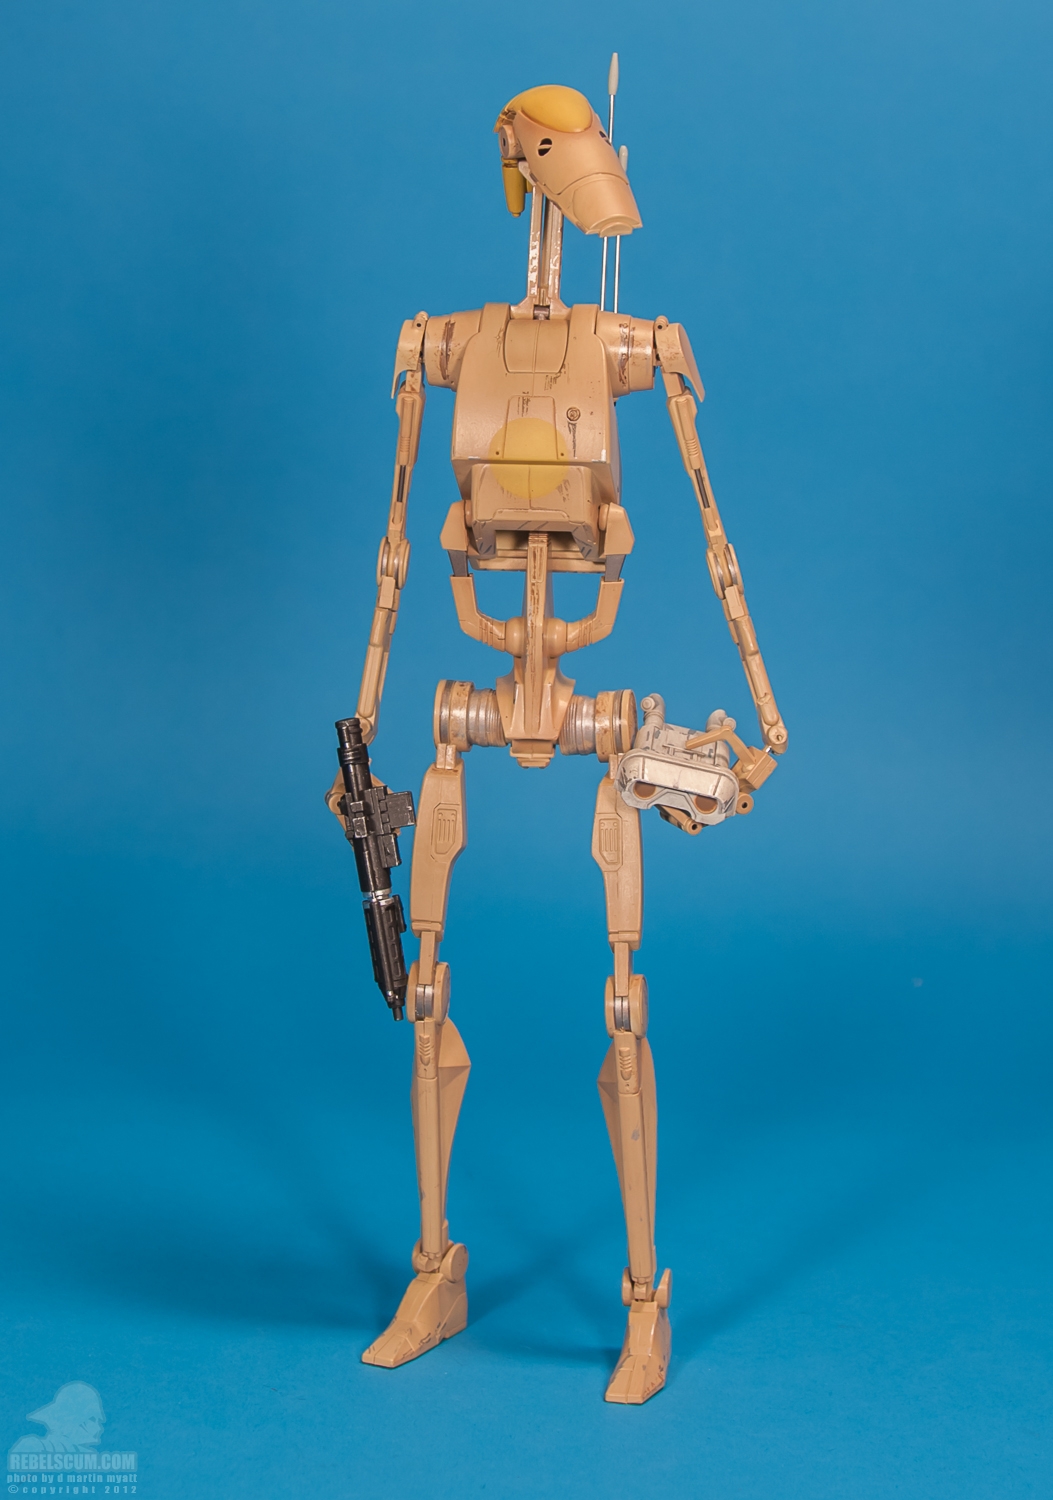 OOM-9_Battle_Droid_Commander_Sideshow_Collectibles-13.jpg